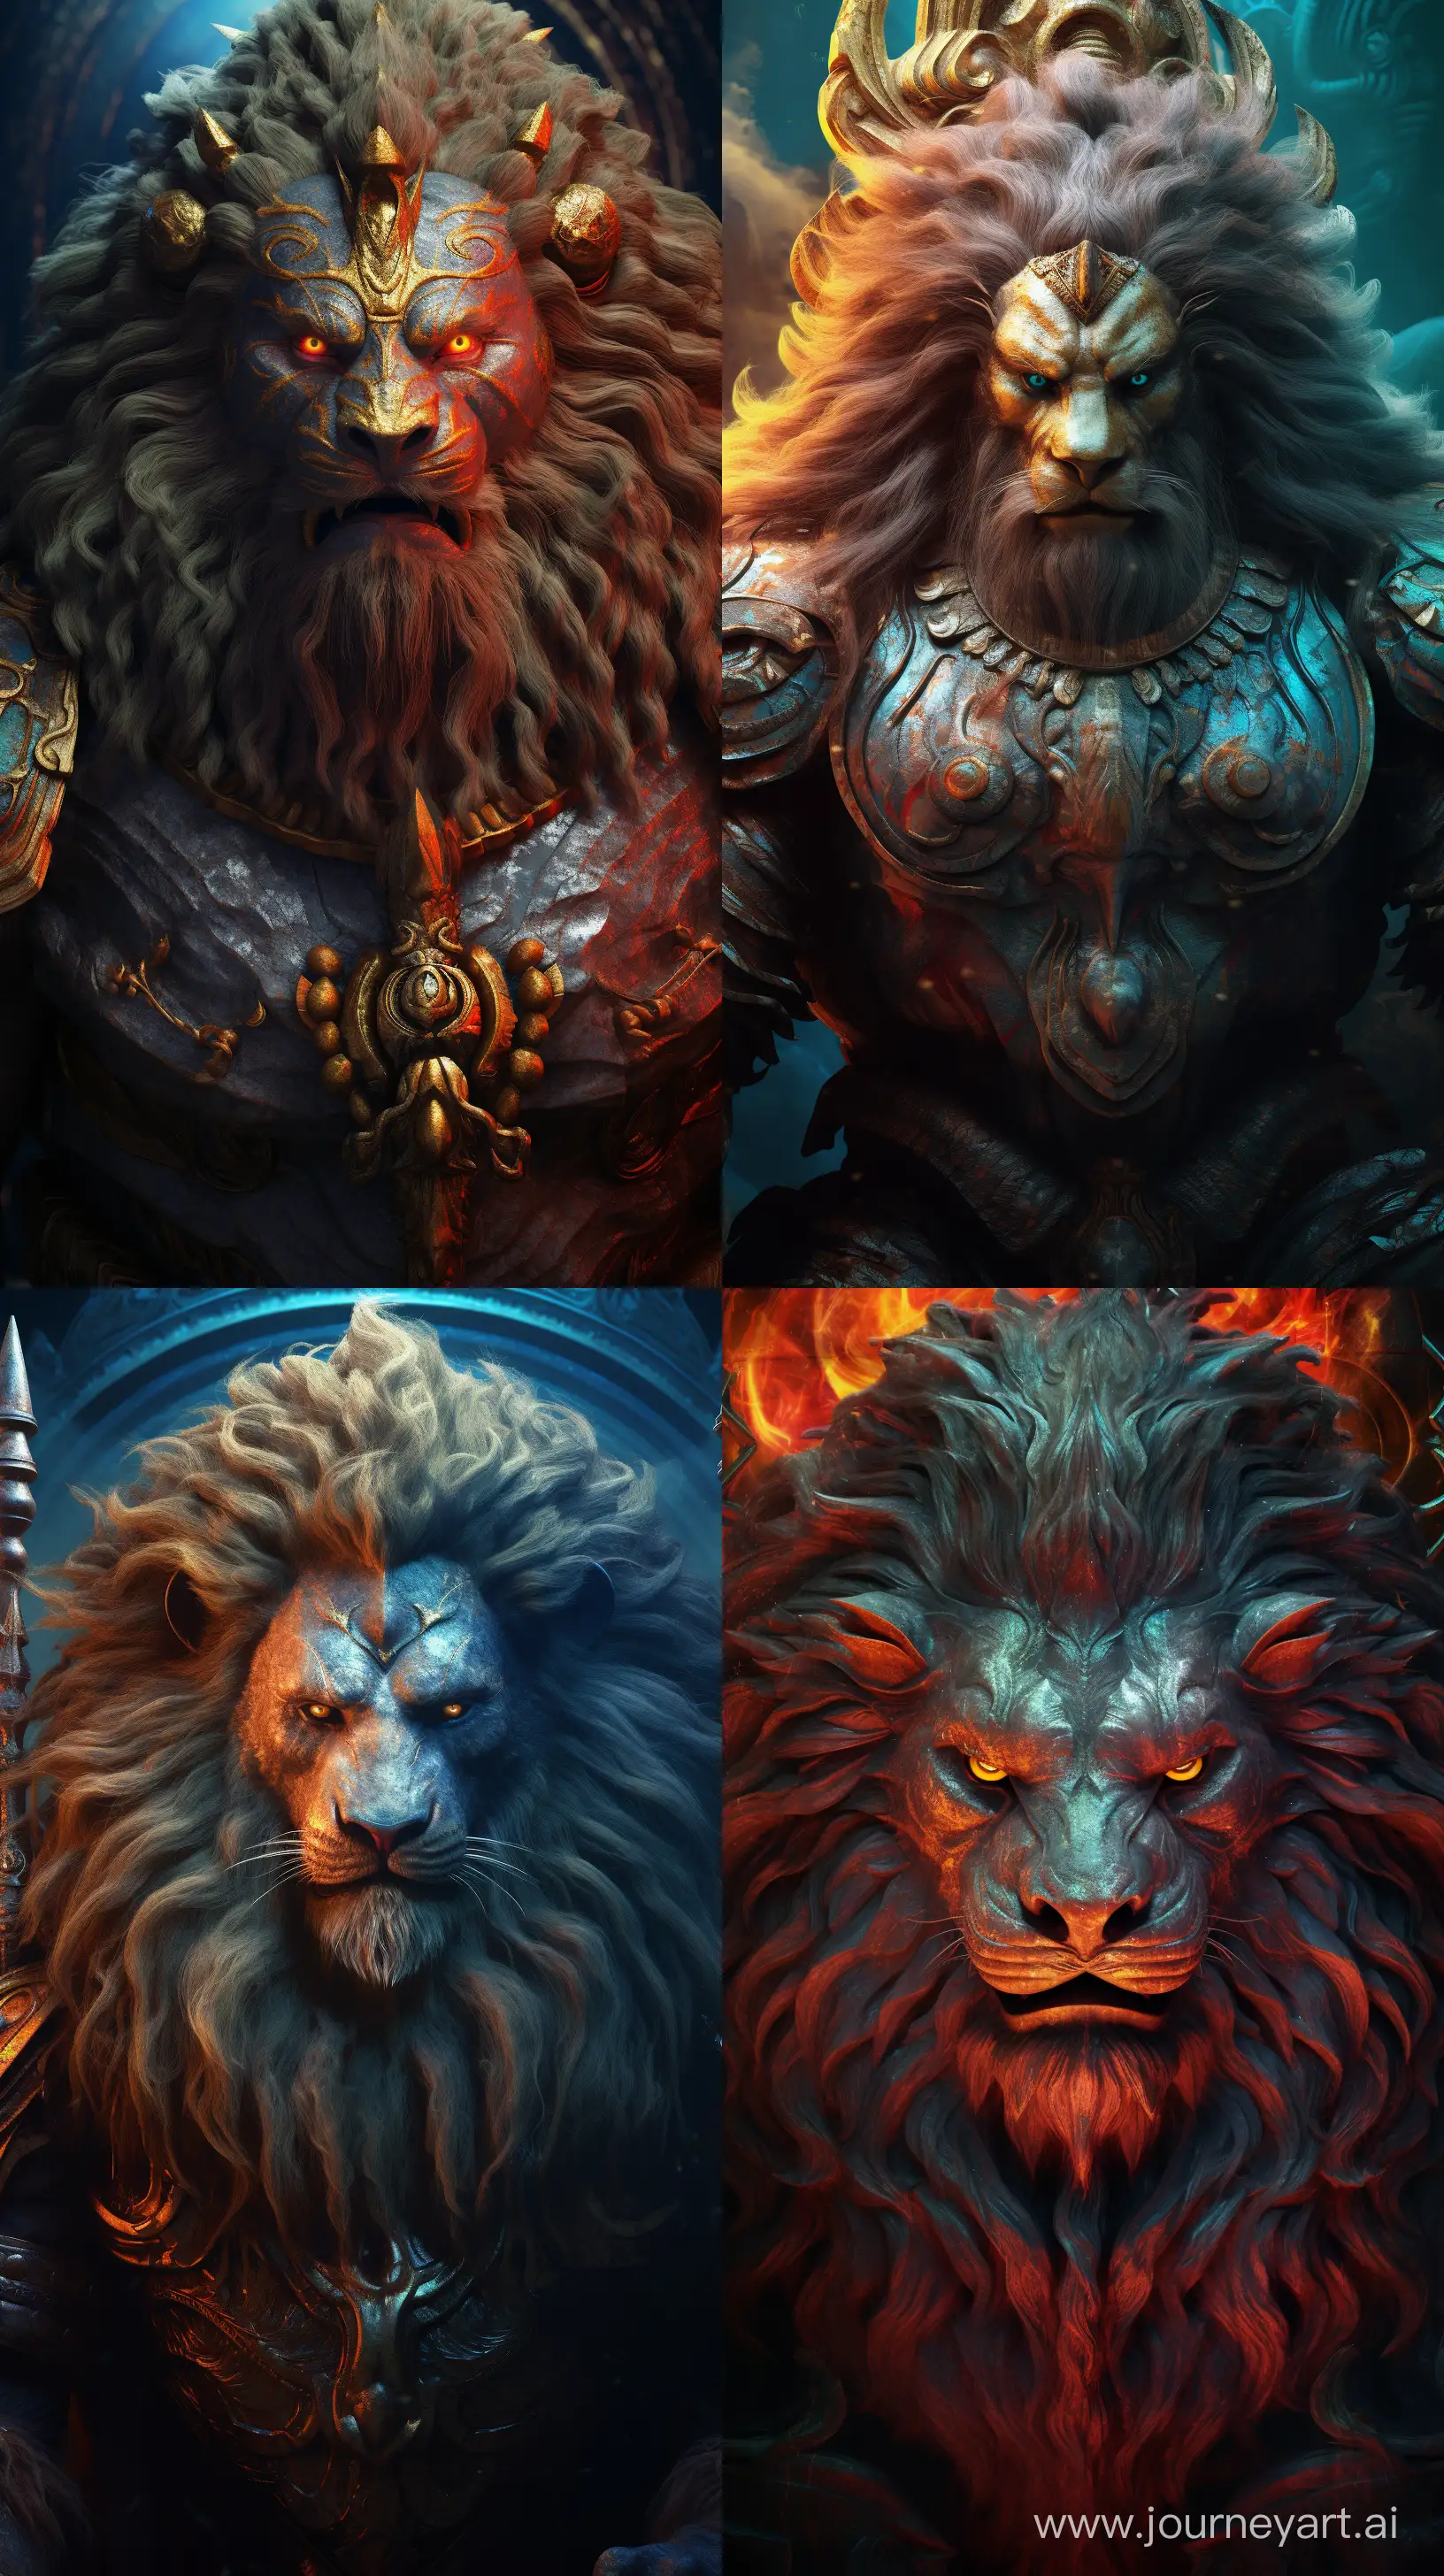 Realistic colorful images depicting Narasimha avatar from Hindu mythology, the head of a lion and a body of a human, fierce roaring look, close up image, dim ambient lighting, intricate details, 8k quality images --ar 9:16